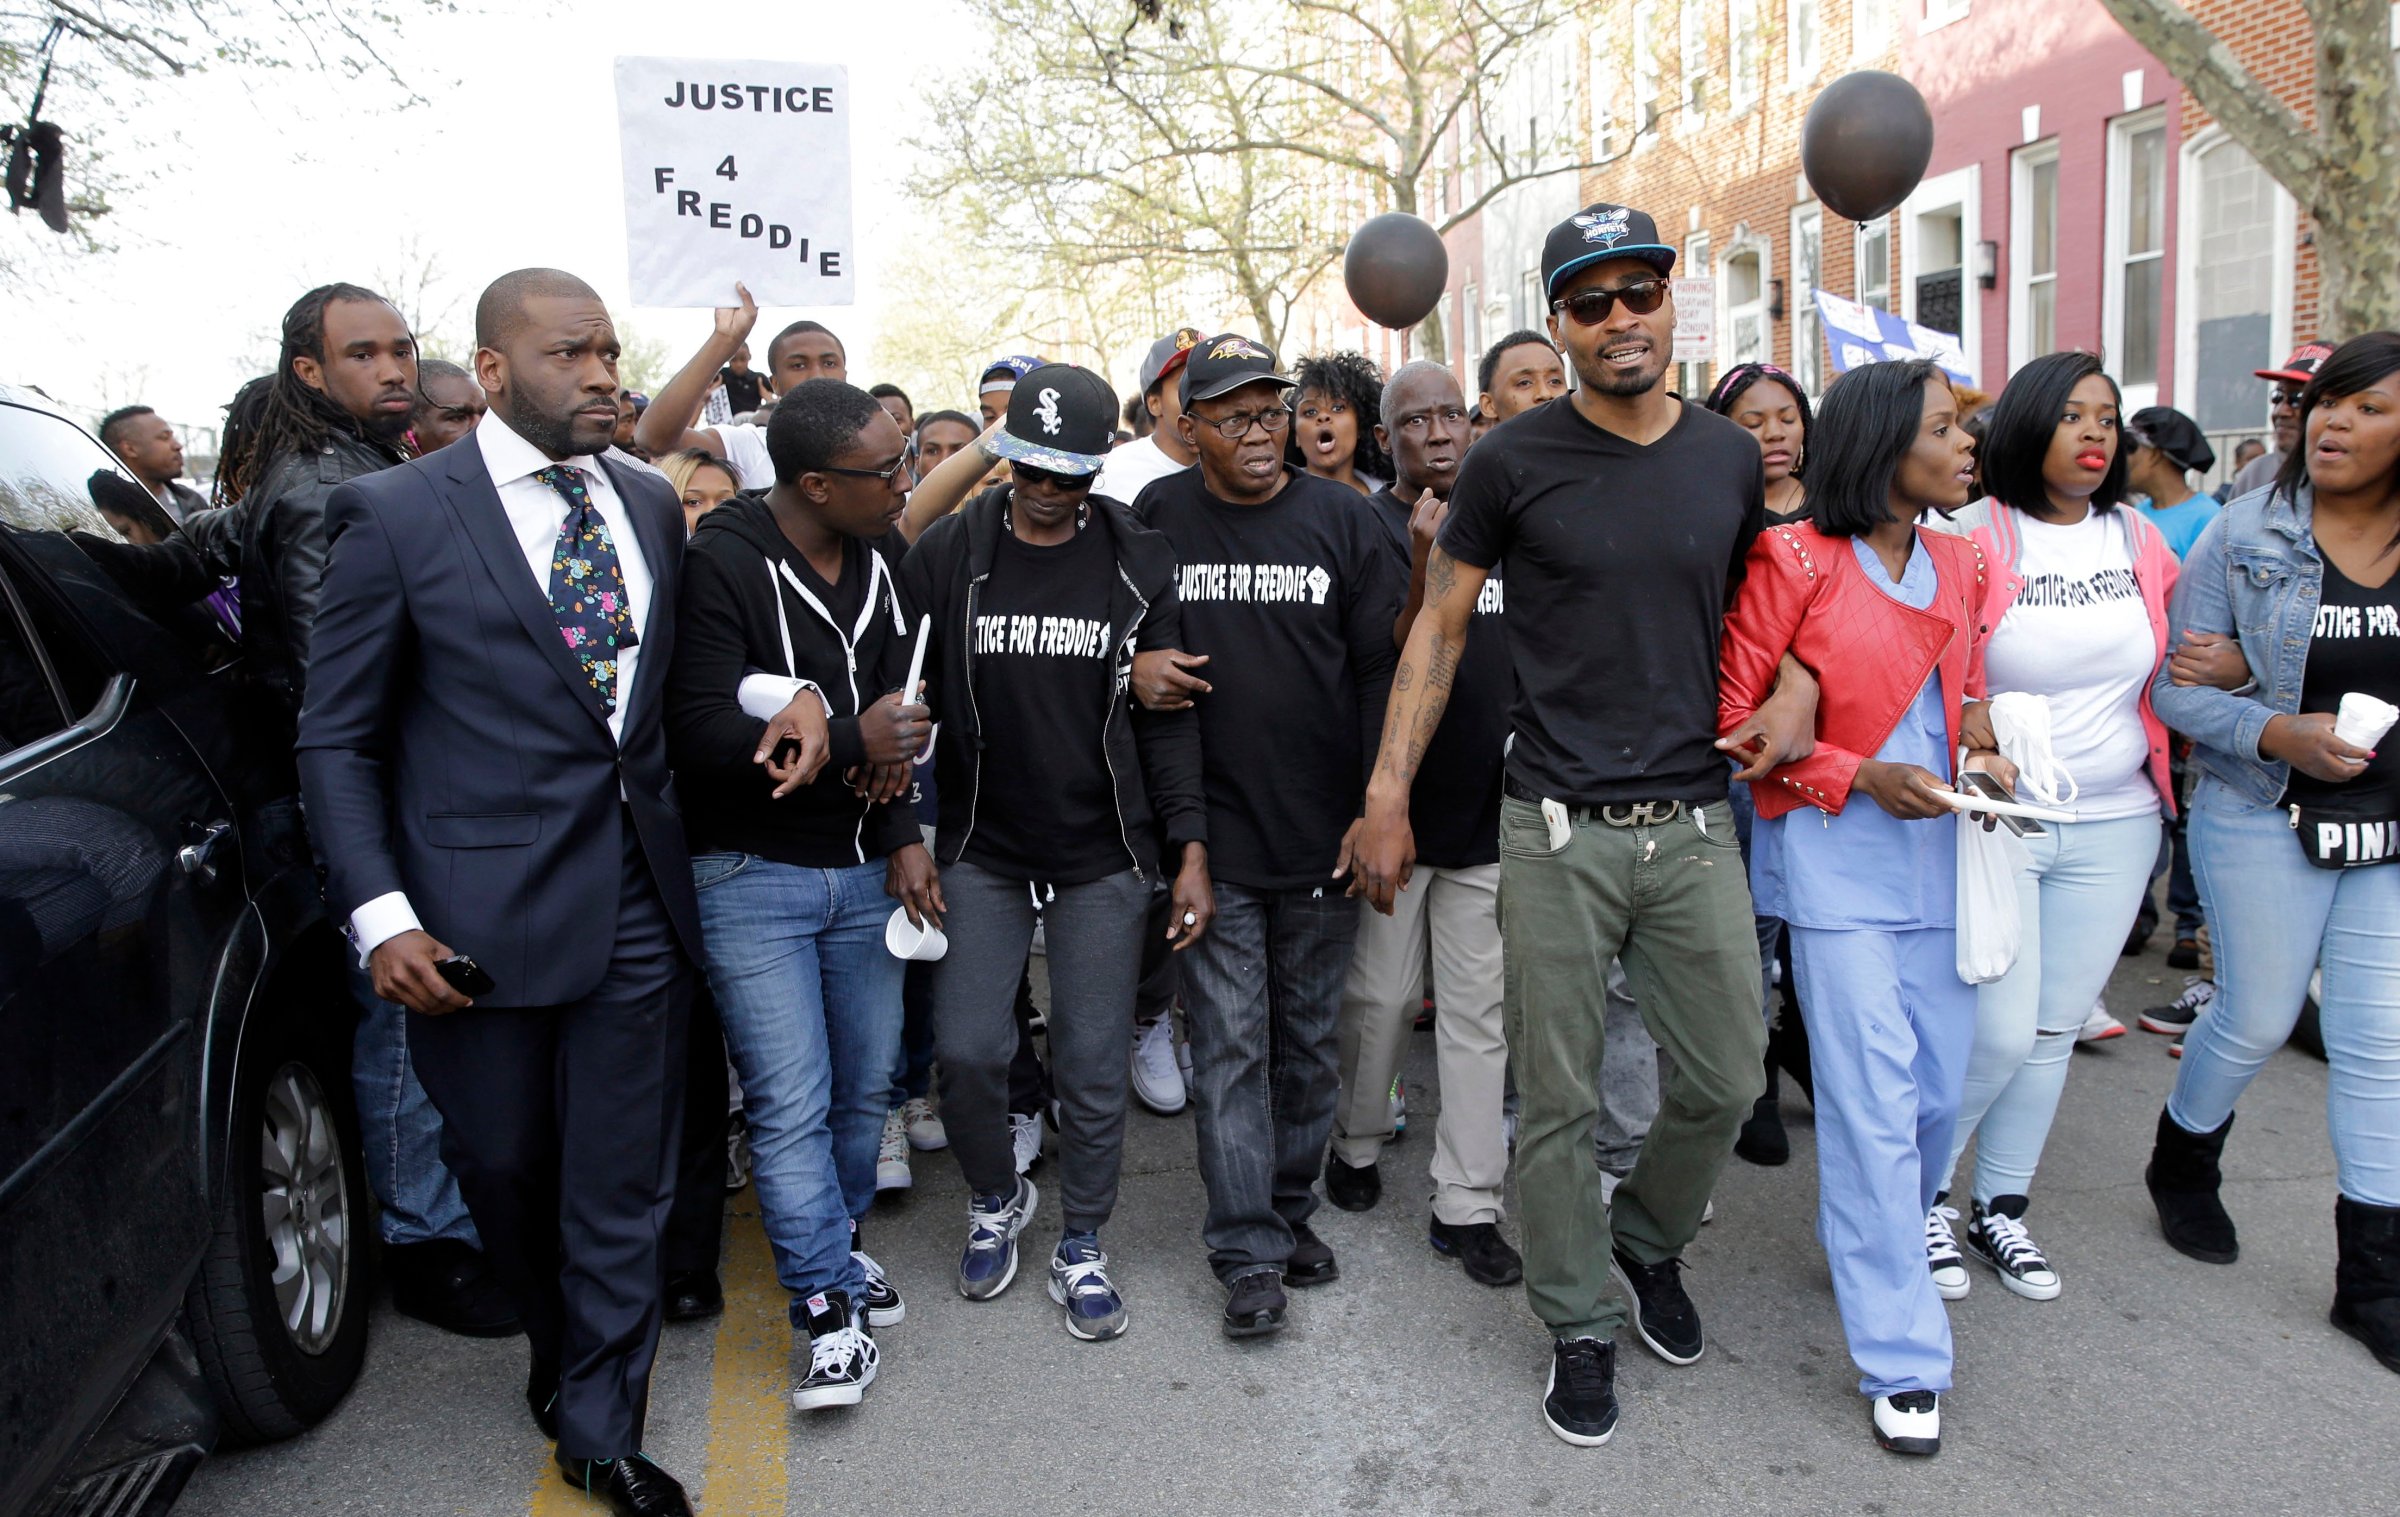 Gloria Darden, third from left, mother of Freddie Gray, walks with supporters and family members of Gray in a march to the Baltimore Police Department's Western District police station during a vigil for Gray on April 21, 2015, in Baltimore.